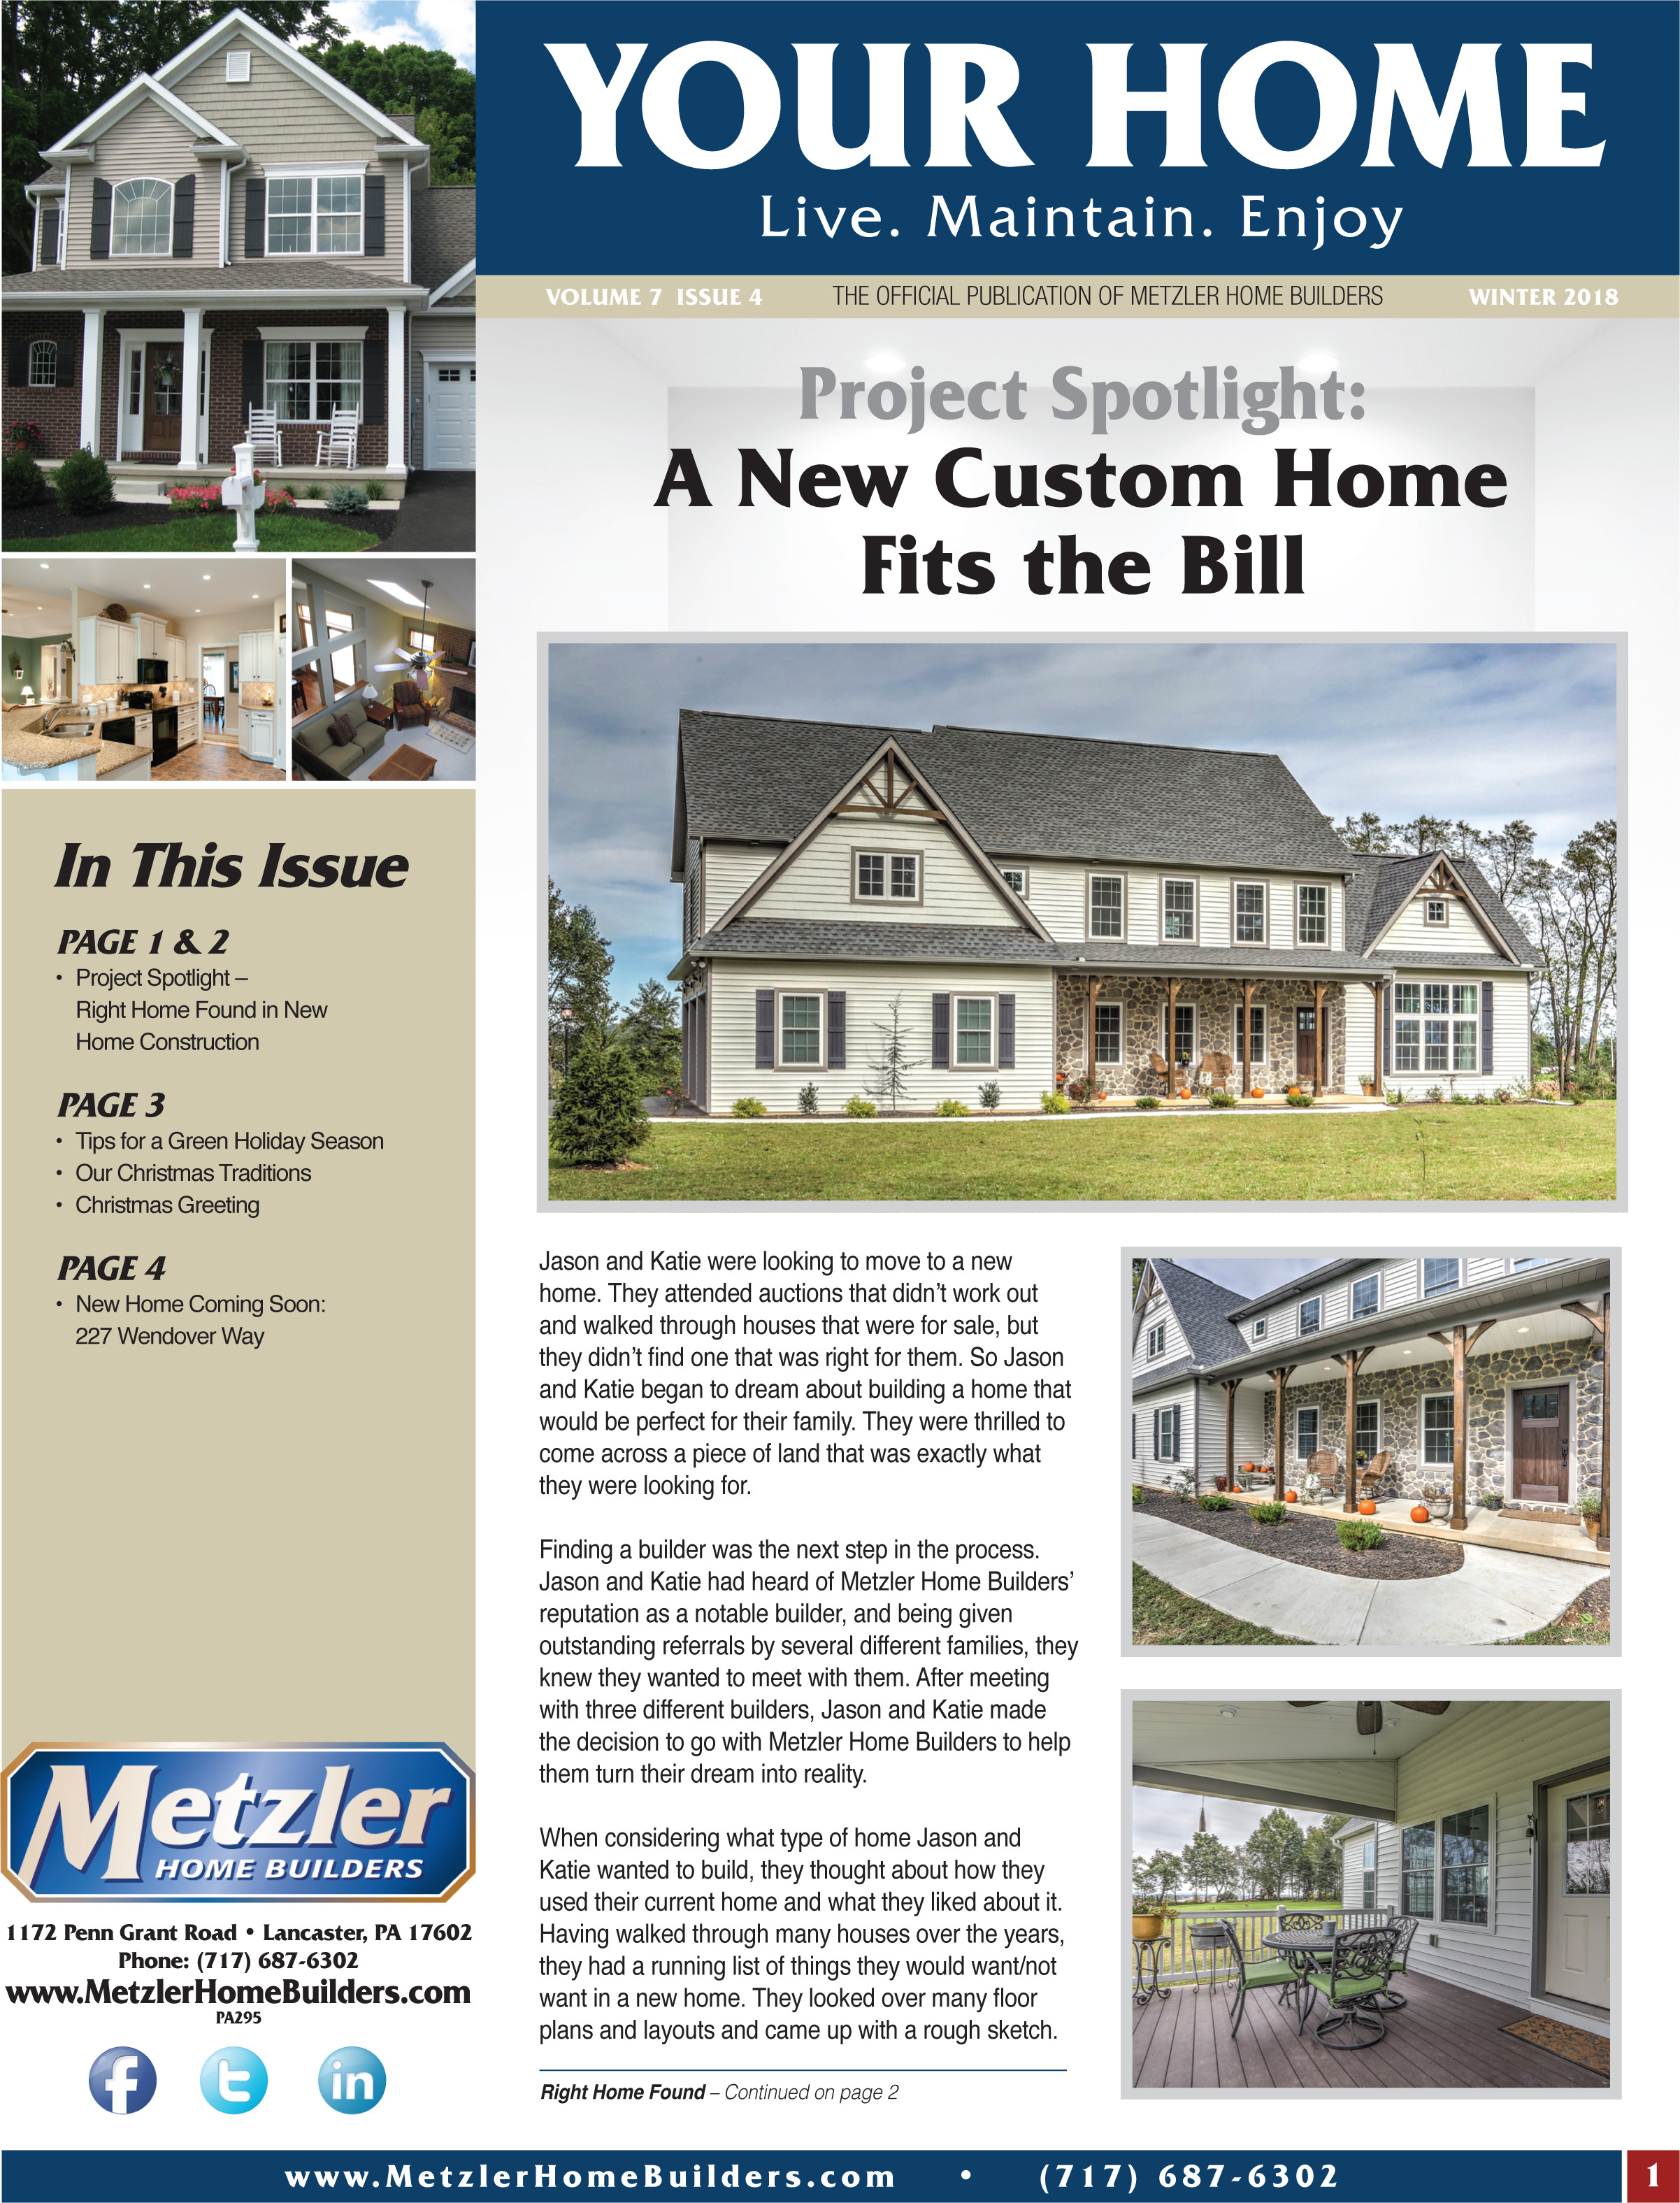 Metzler 'Your Home' Newsletter PDF cover for Volume 7 Issue 4